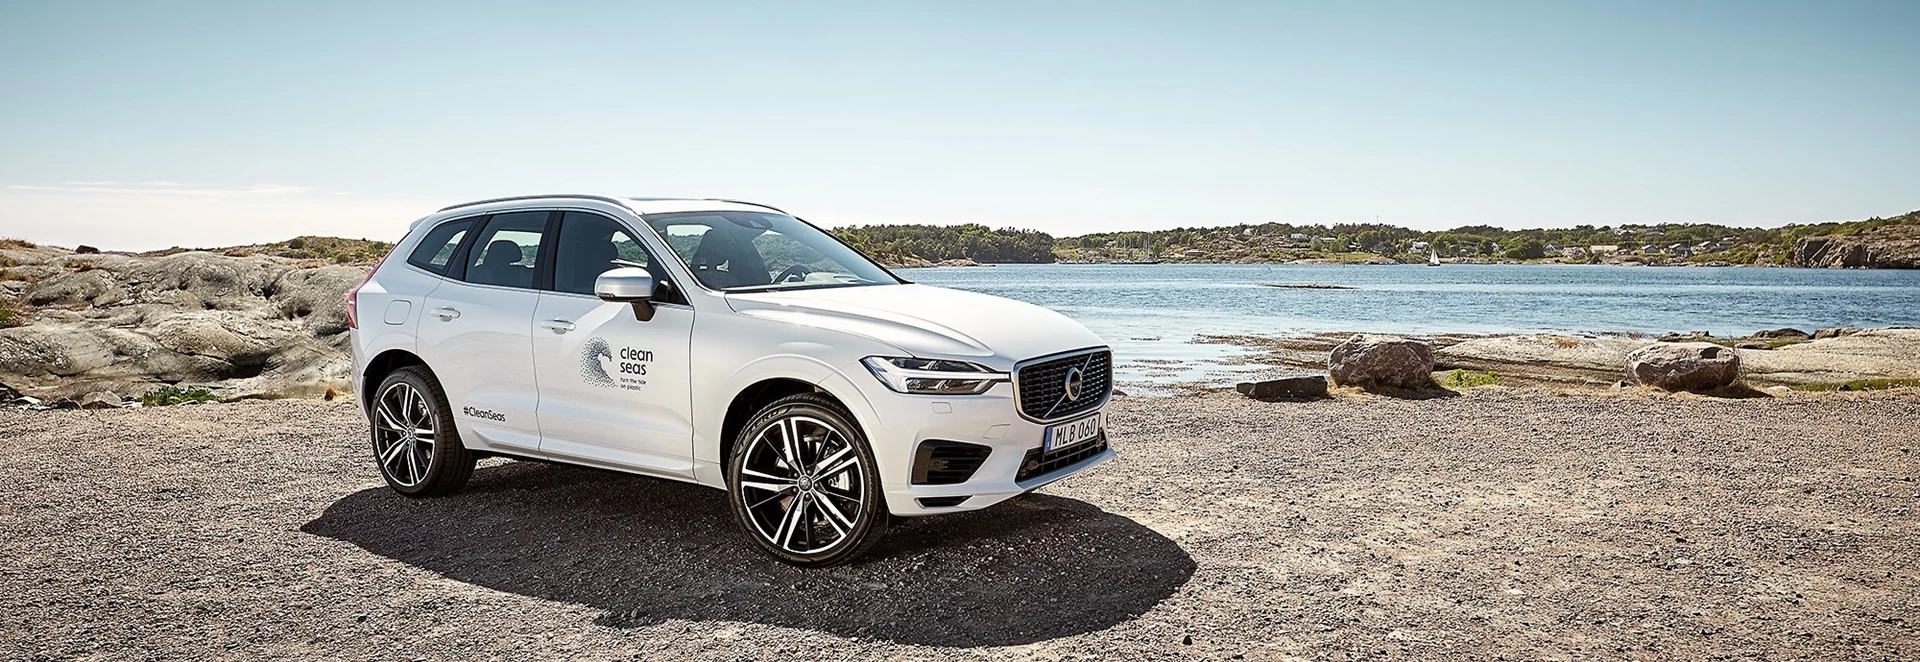 Volvo sets target for recycled material use in vehicles